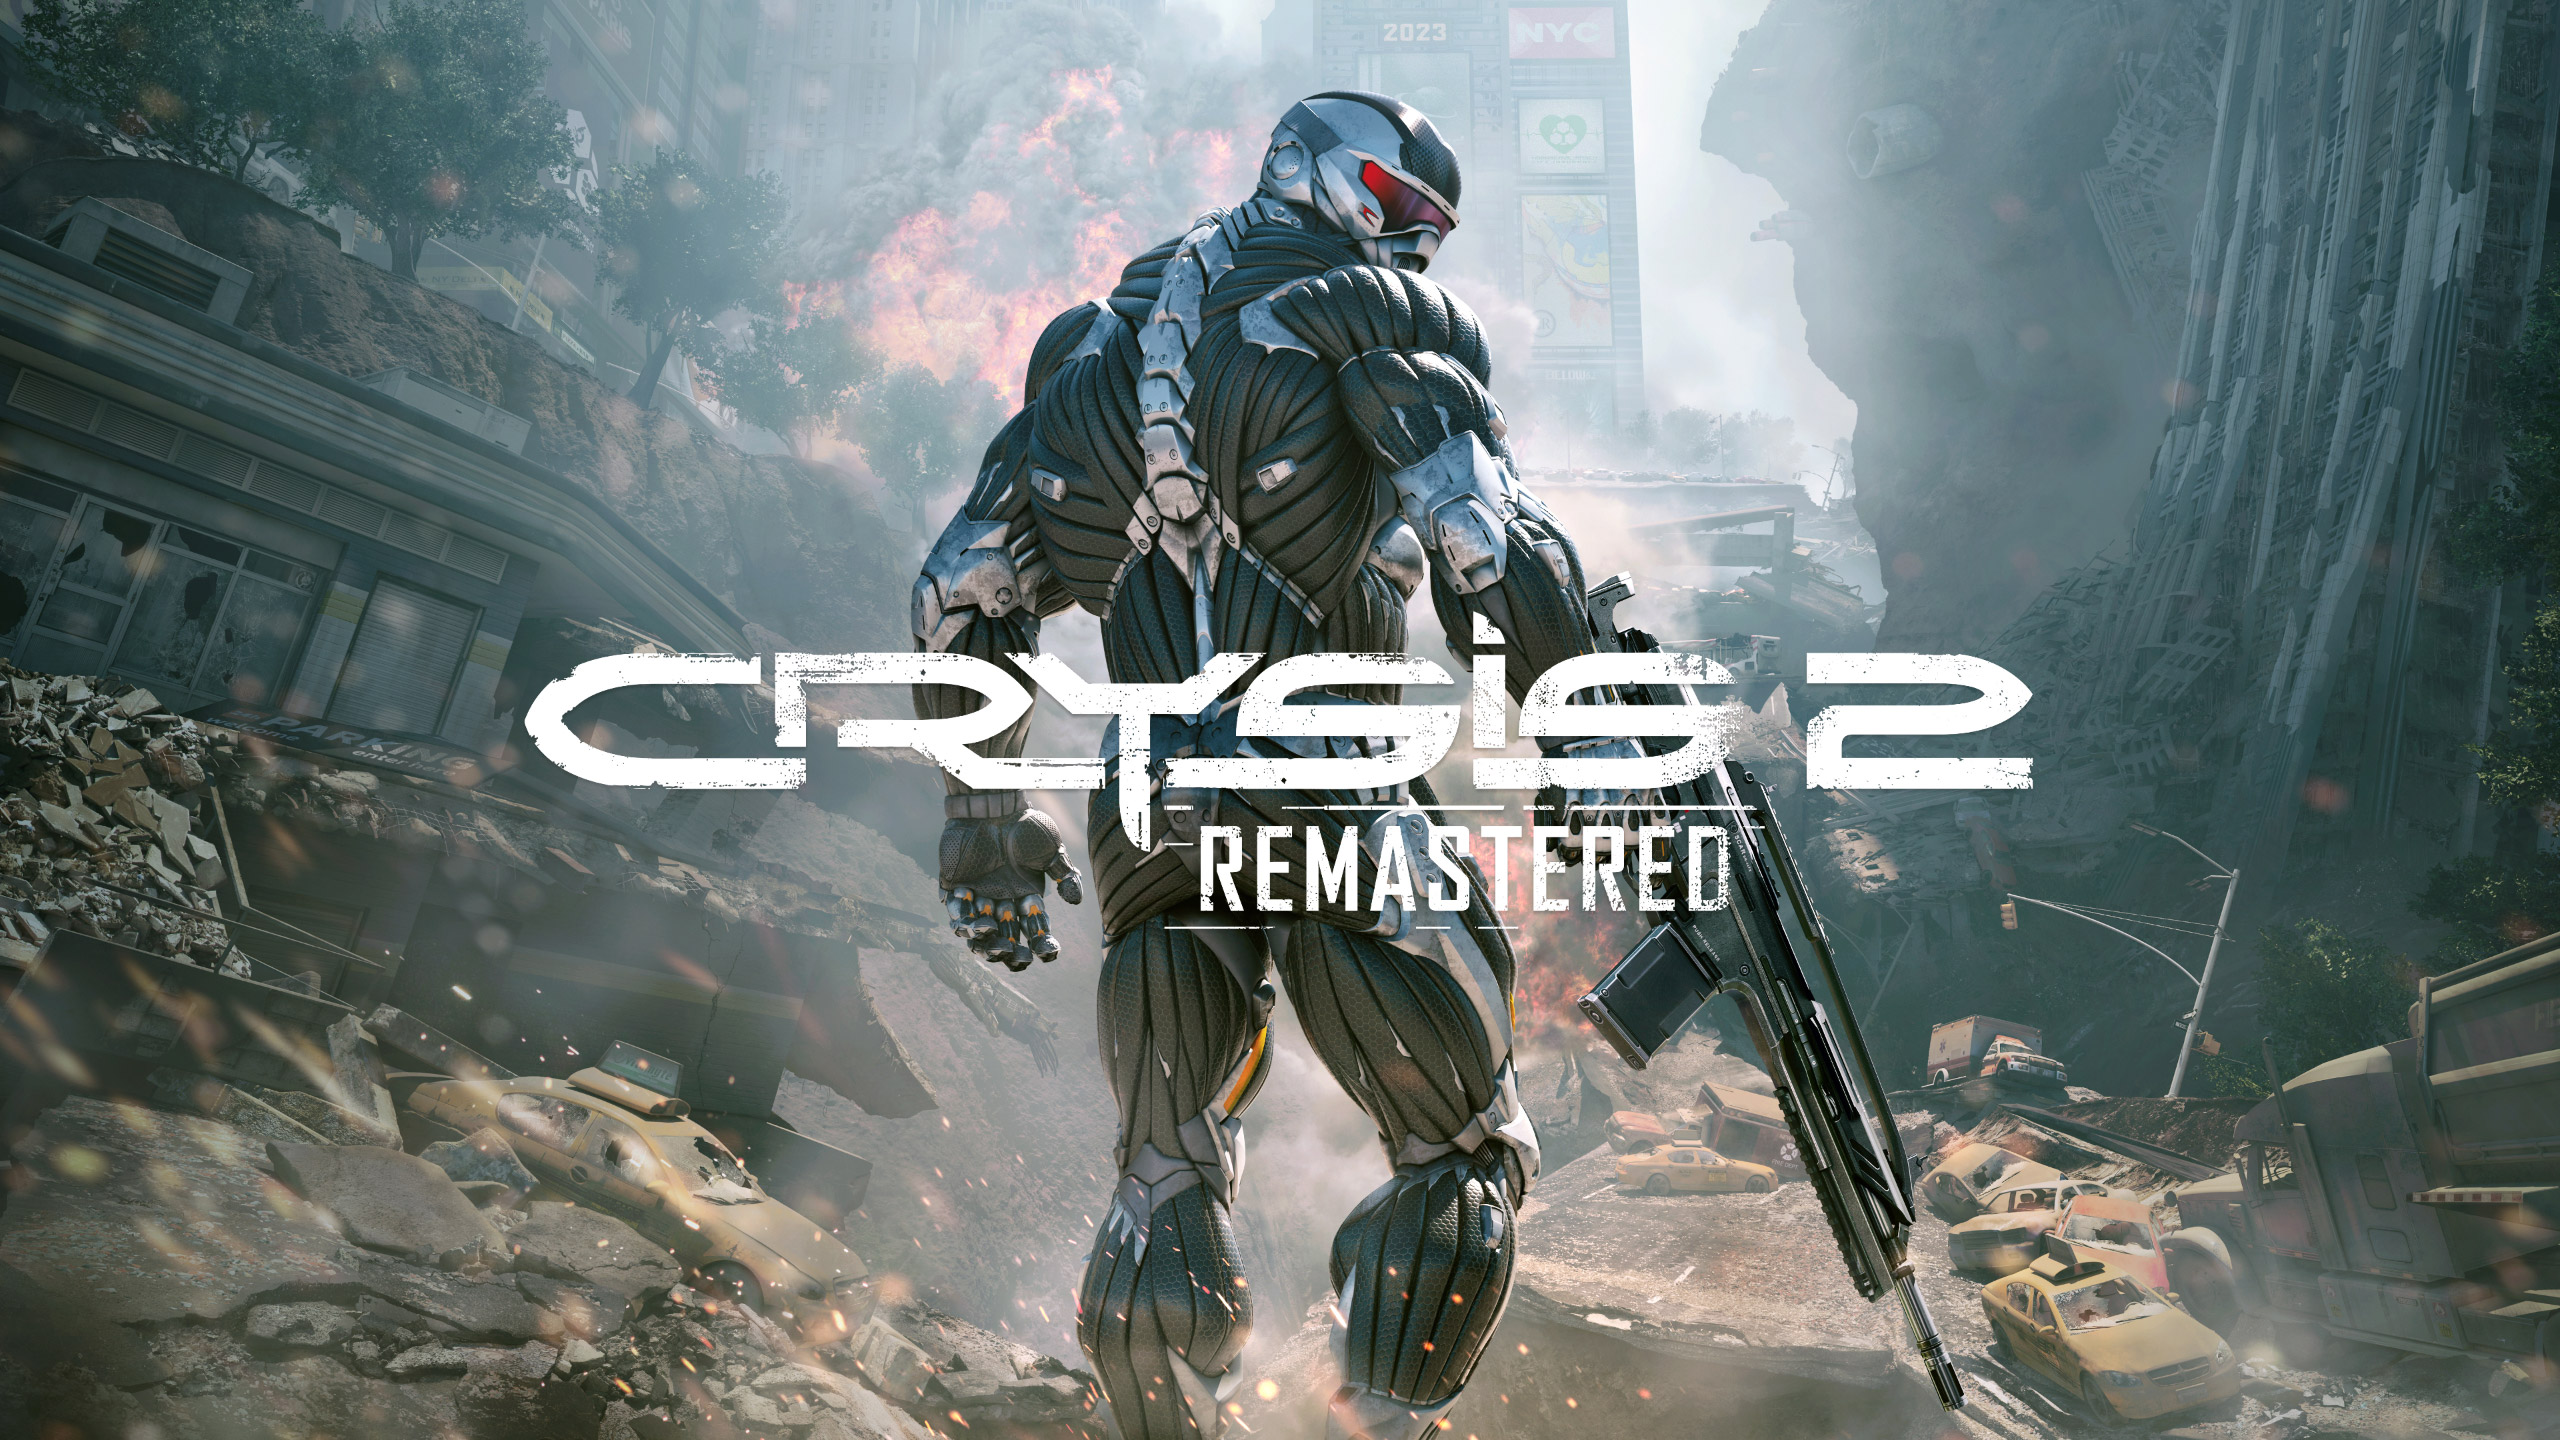 Crysis 2 Remastered. Download and Buy Today Games Store